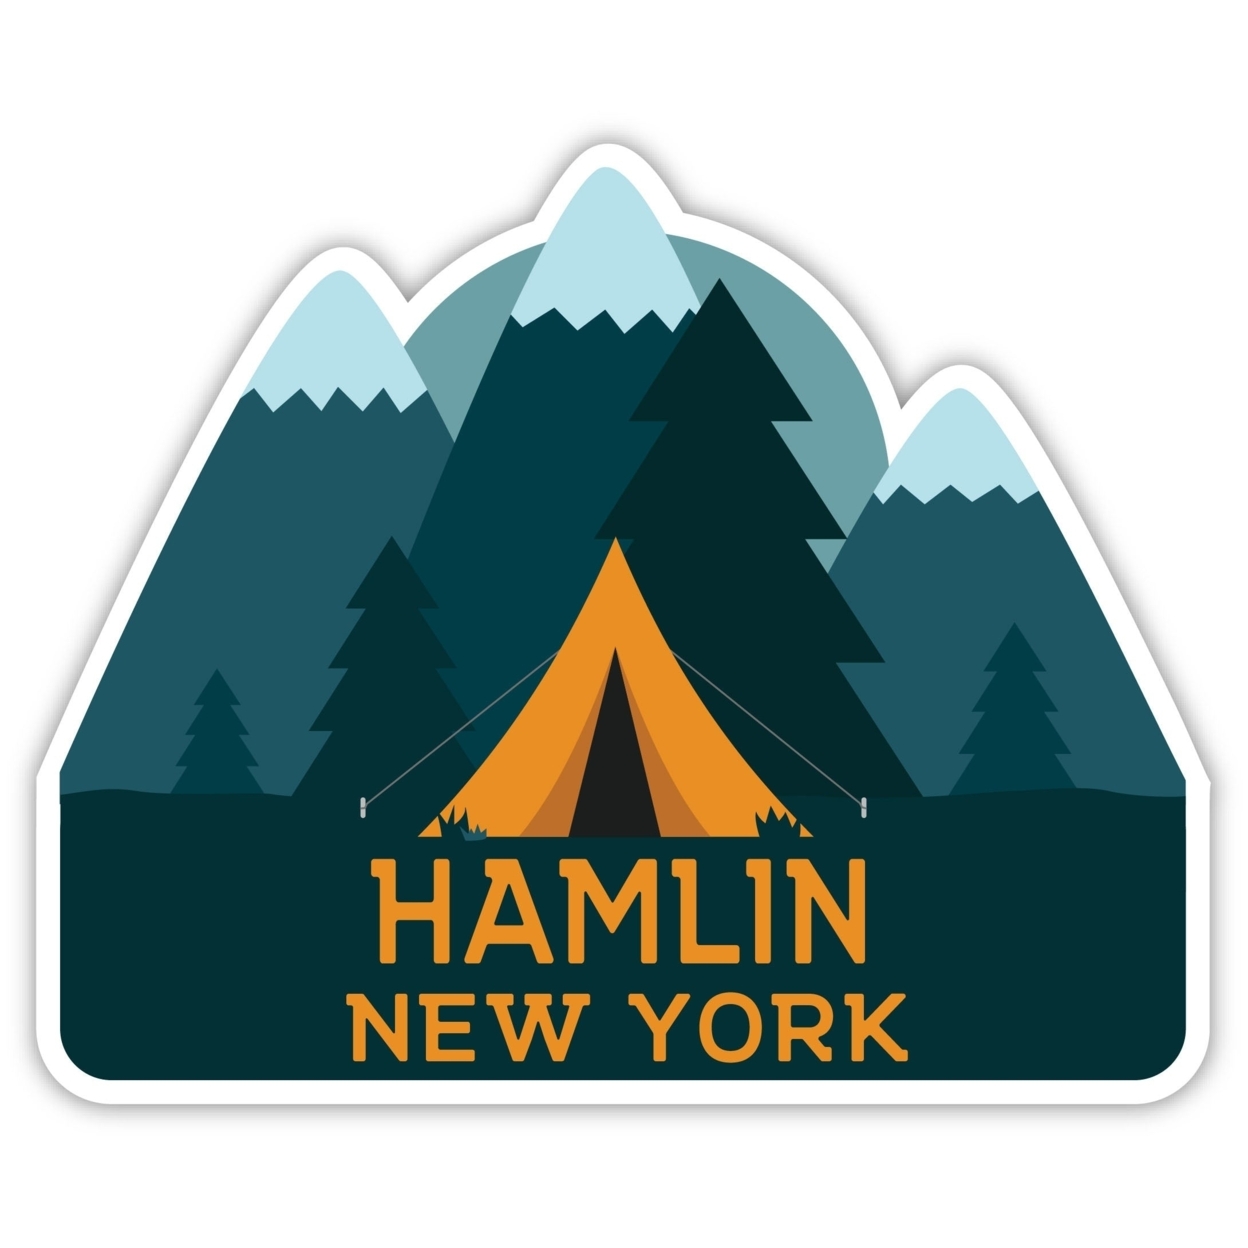 Hamlin New York Souvenir Decorative Stickers (Choose Theme And Size) - 4-Pack, 8-Inch, Tent